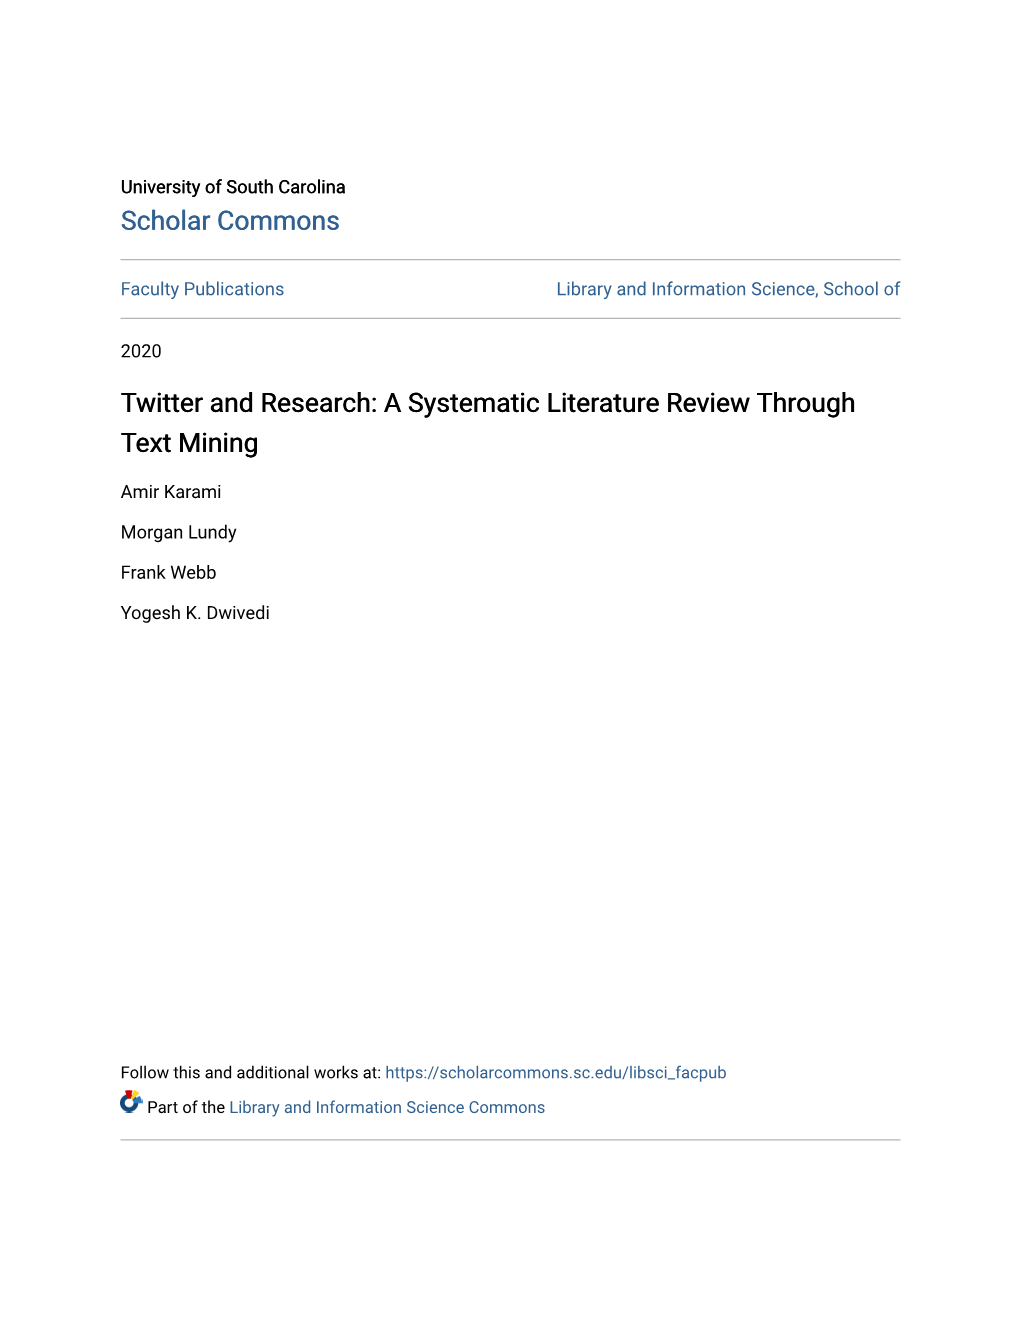 Twitter and Research: a Systematic Literature Review Through Text Mining